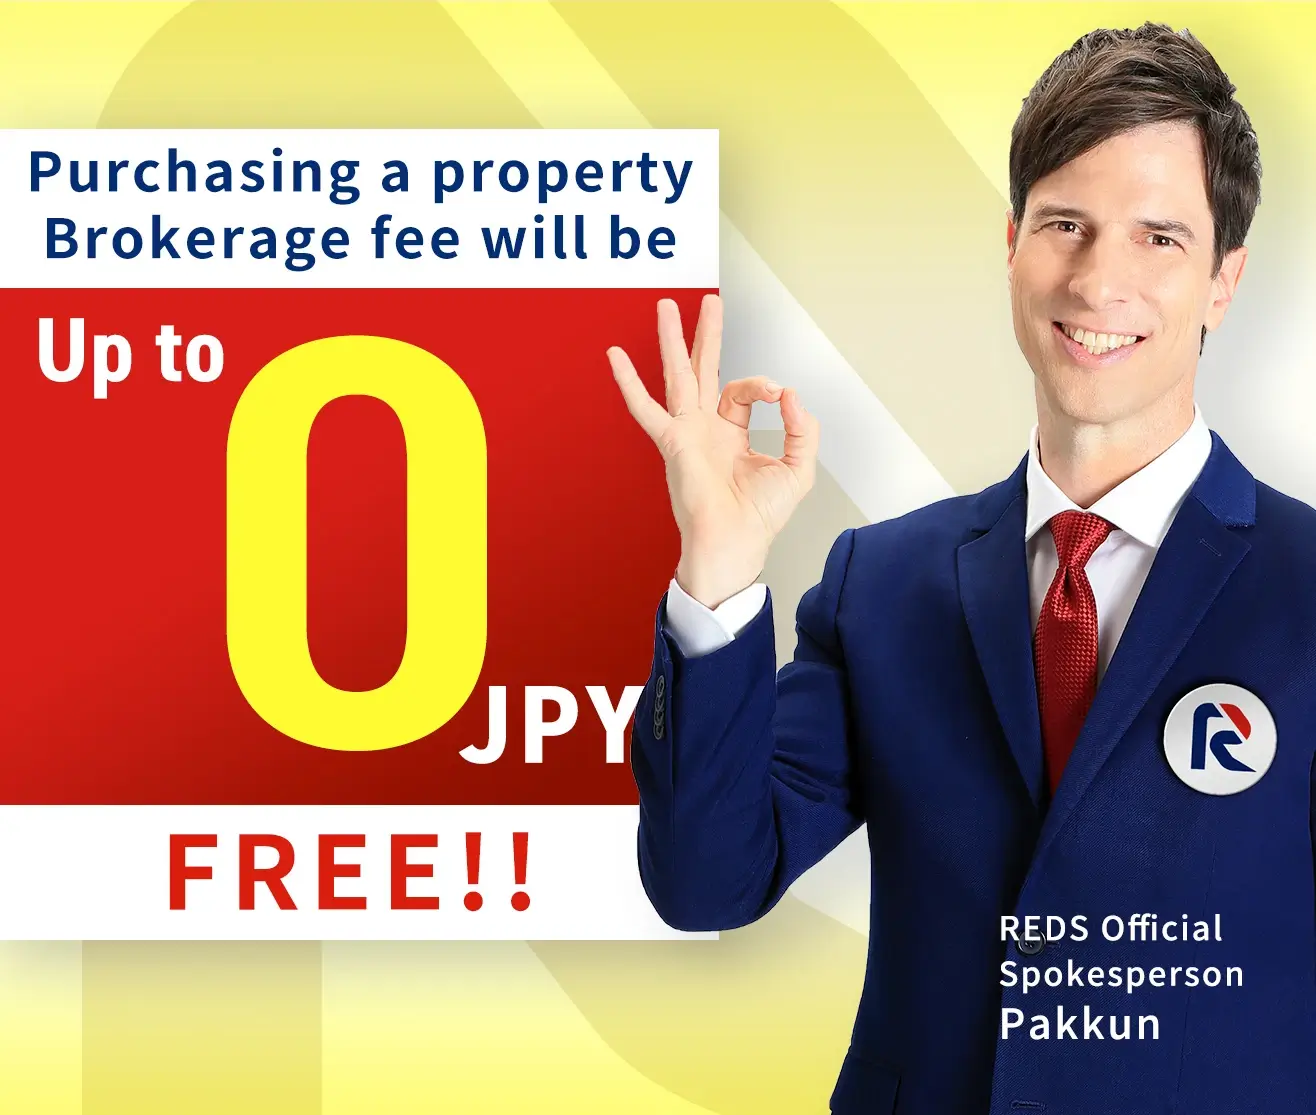 Purchasing a property Brokerage fee will be Up to 0 JPY